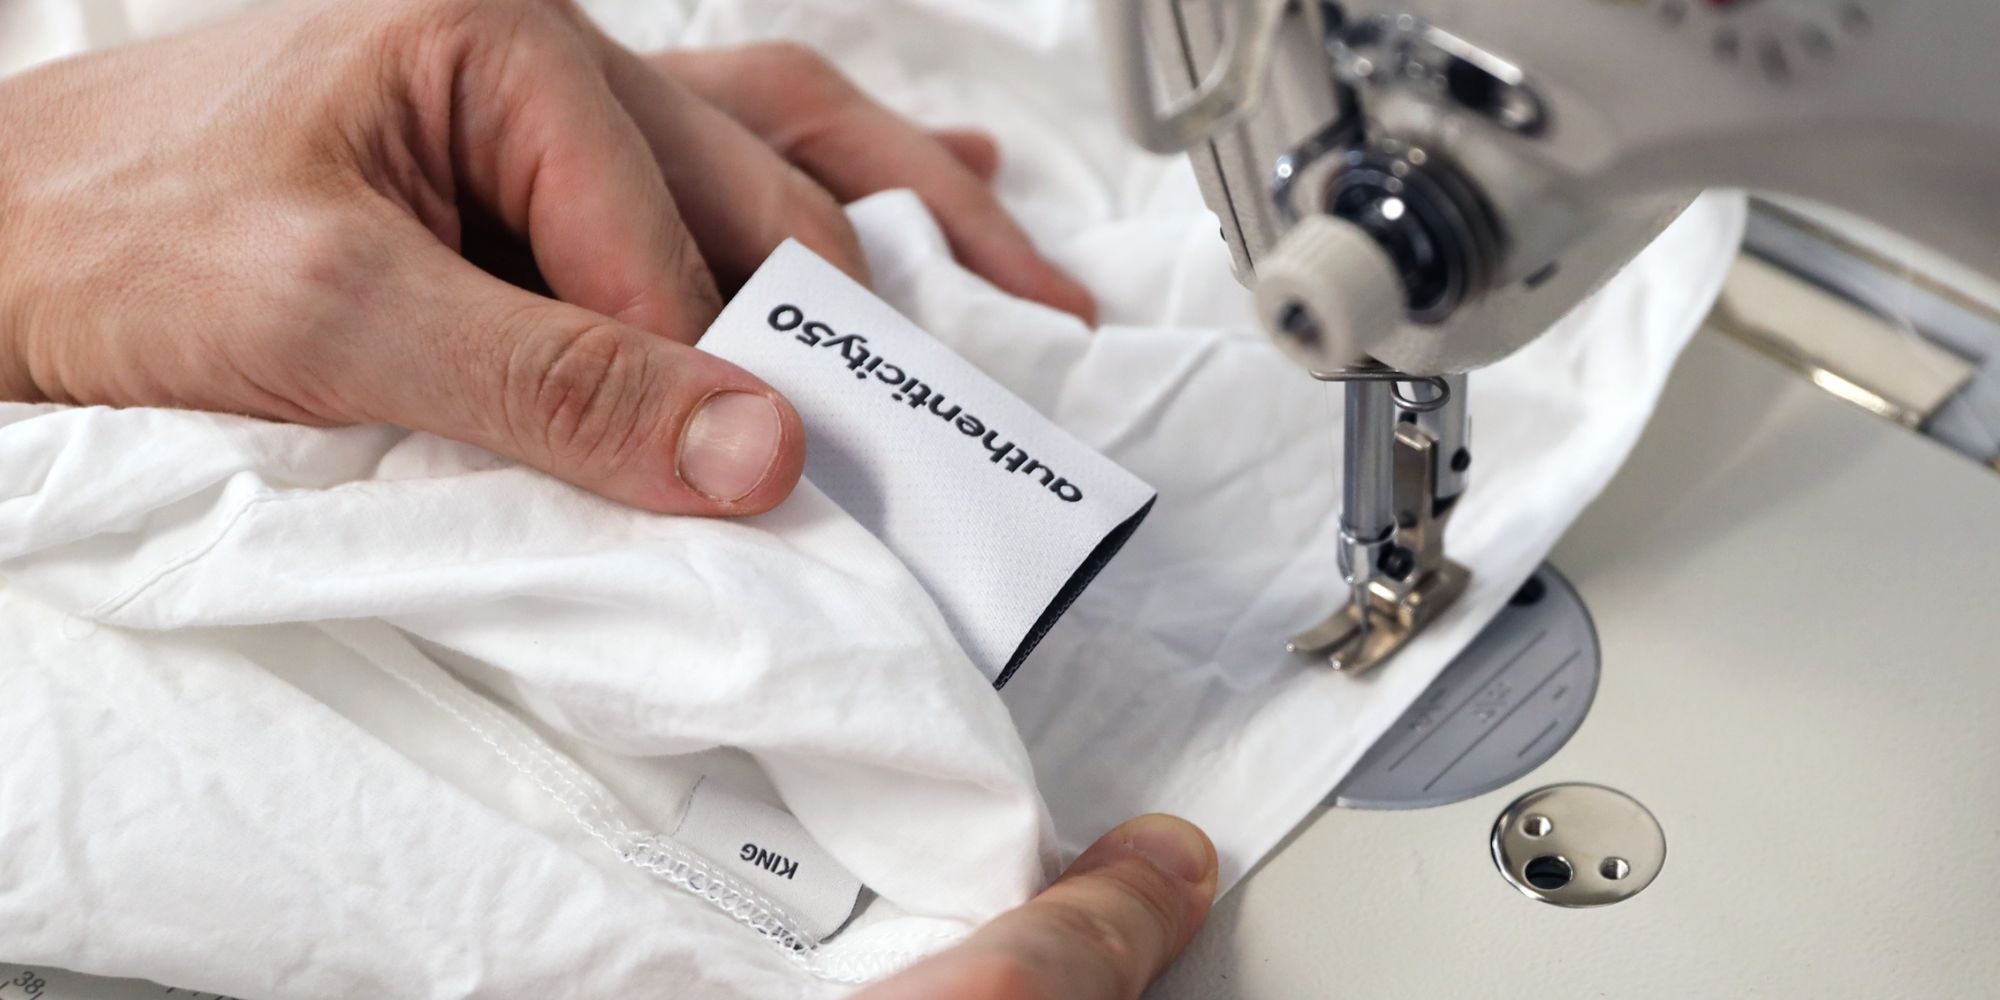 sewing the authenticity50 label onto sheets